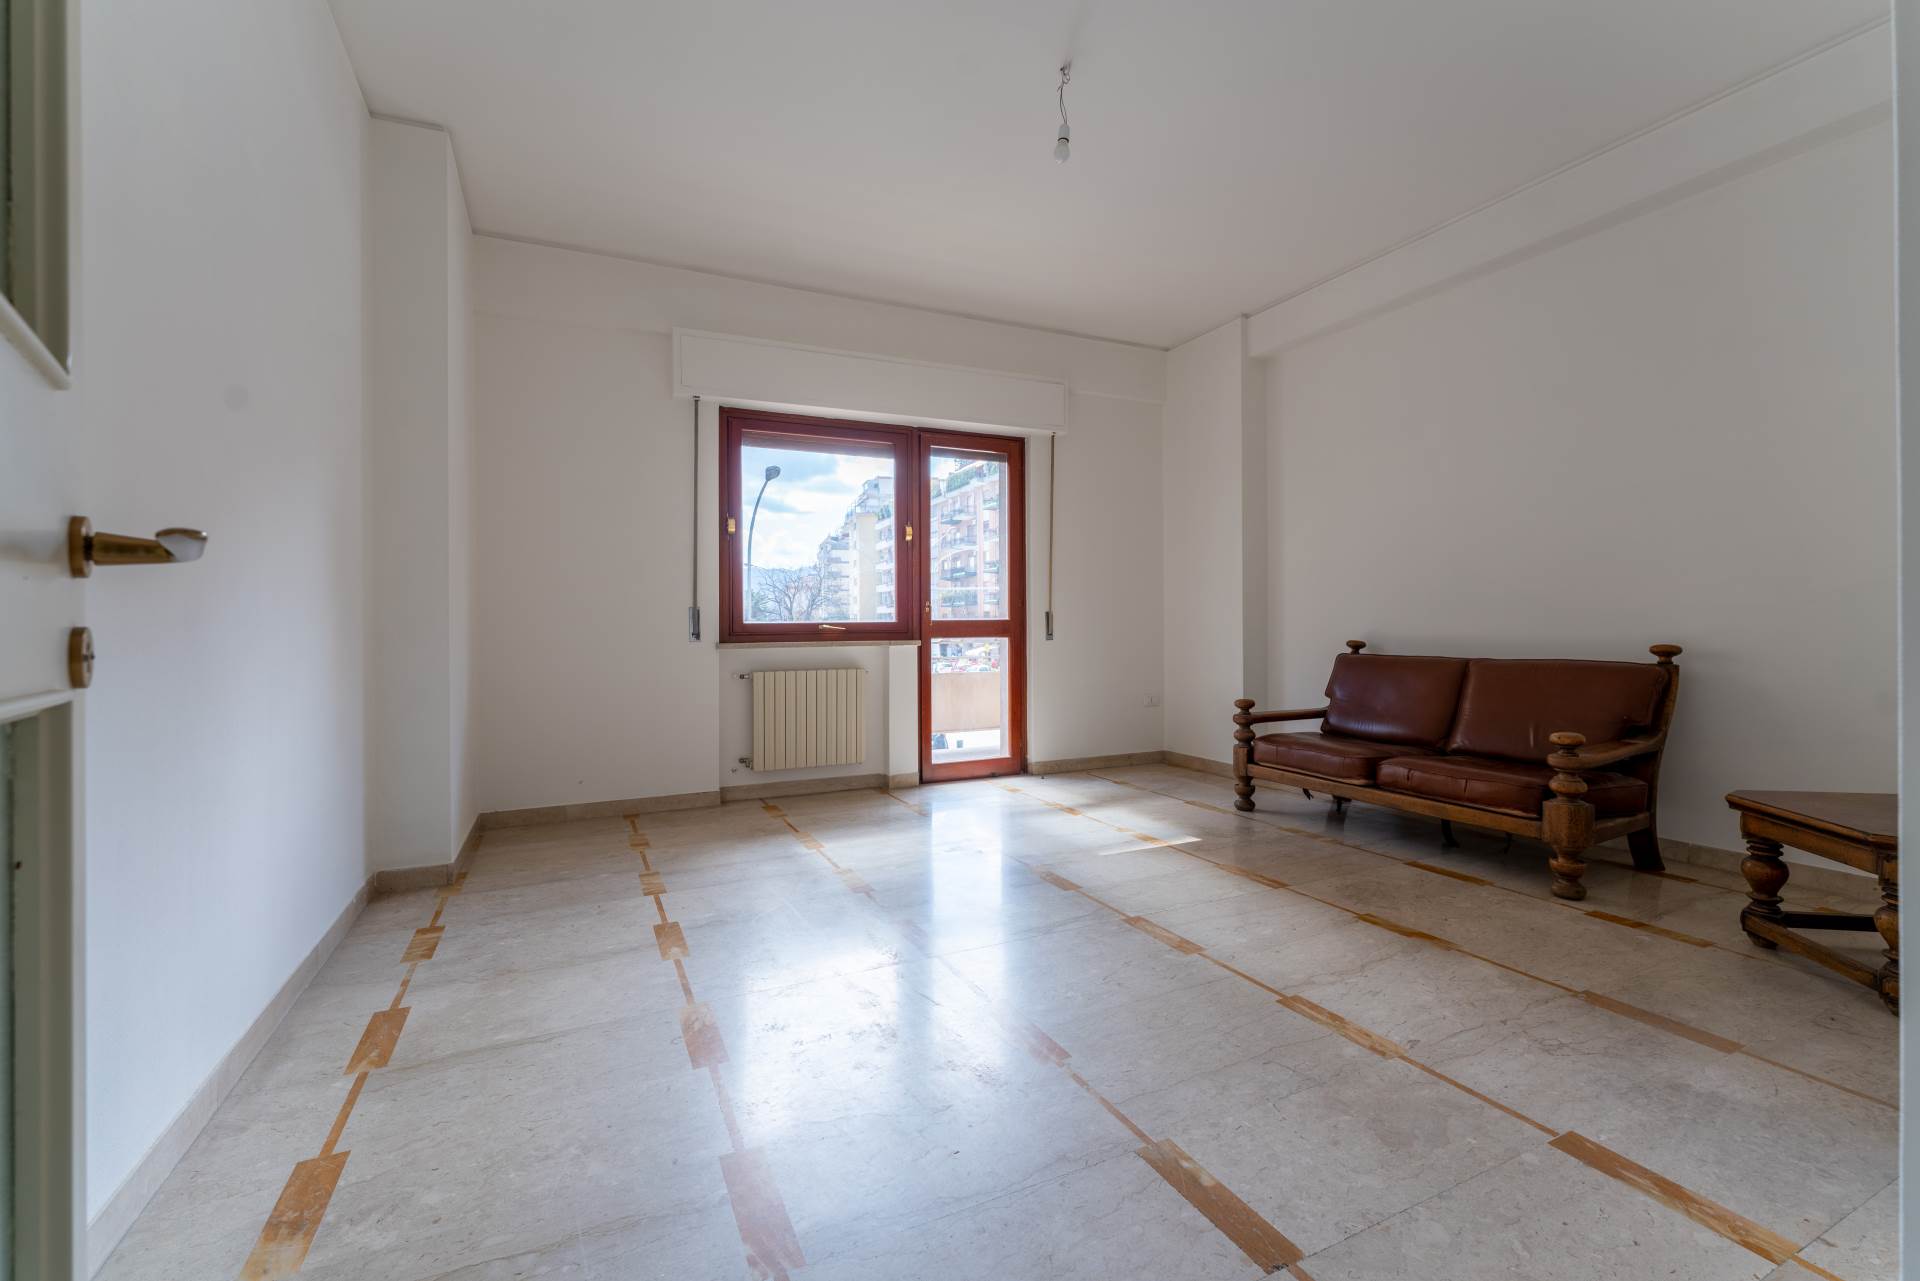 UNITÀ D'ITALIA, PALERMO, Apartment for sale of 154 Sq. mt., Habitable, Heating Individual heating system, Energetic class: G, placed at 1°, composed 